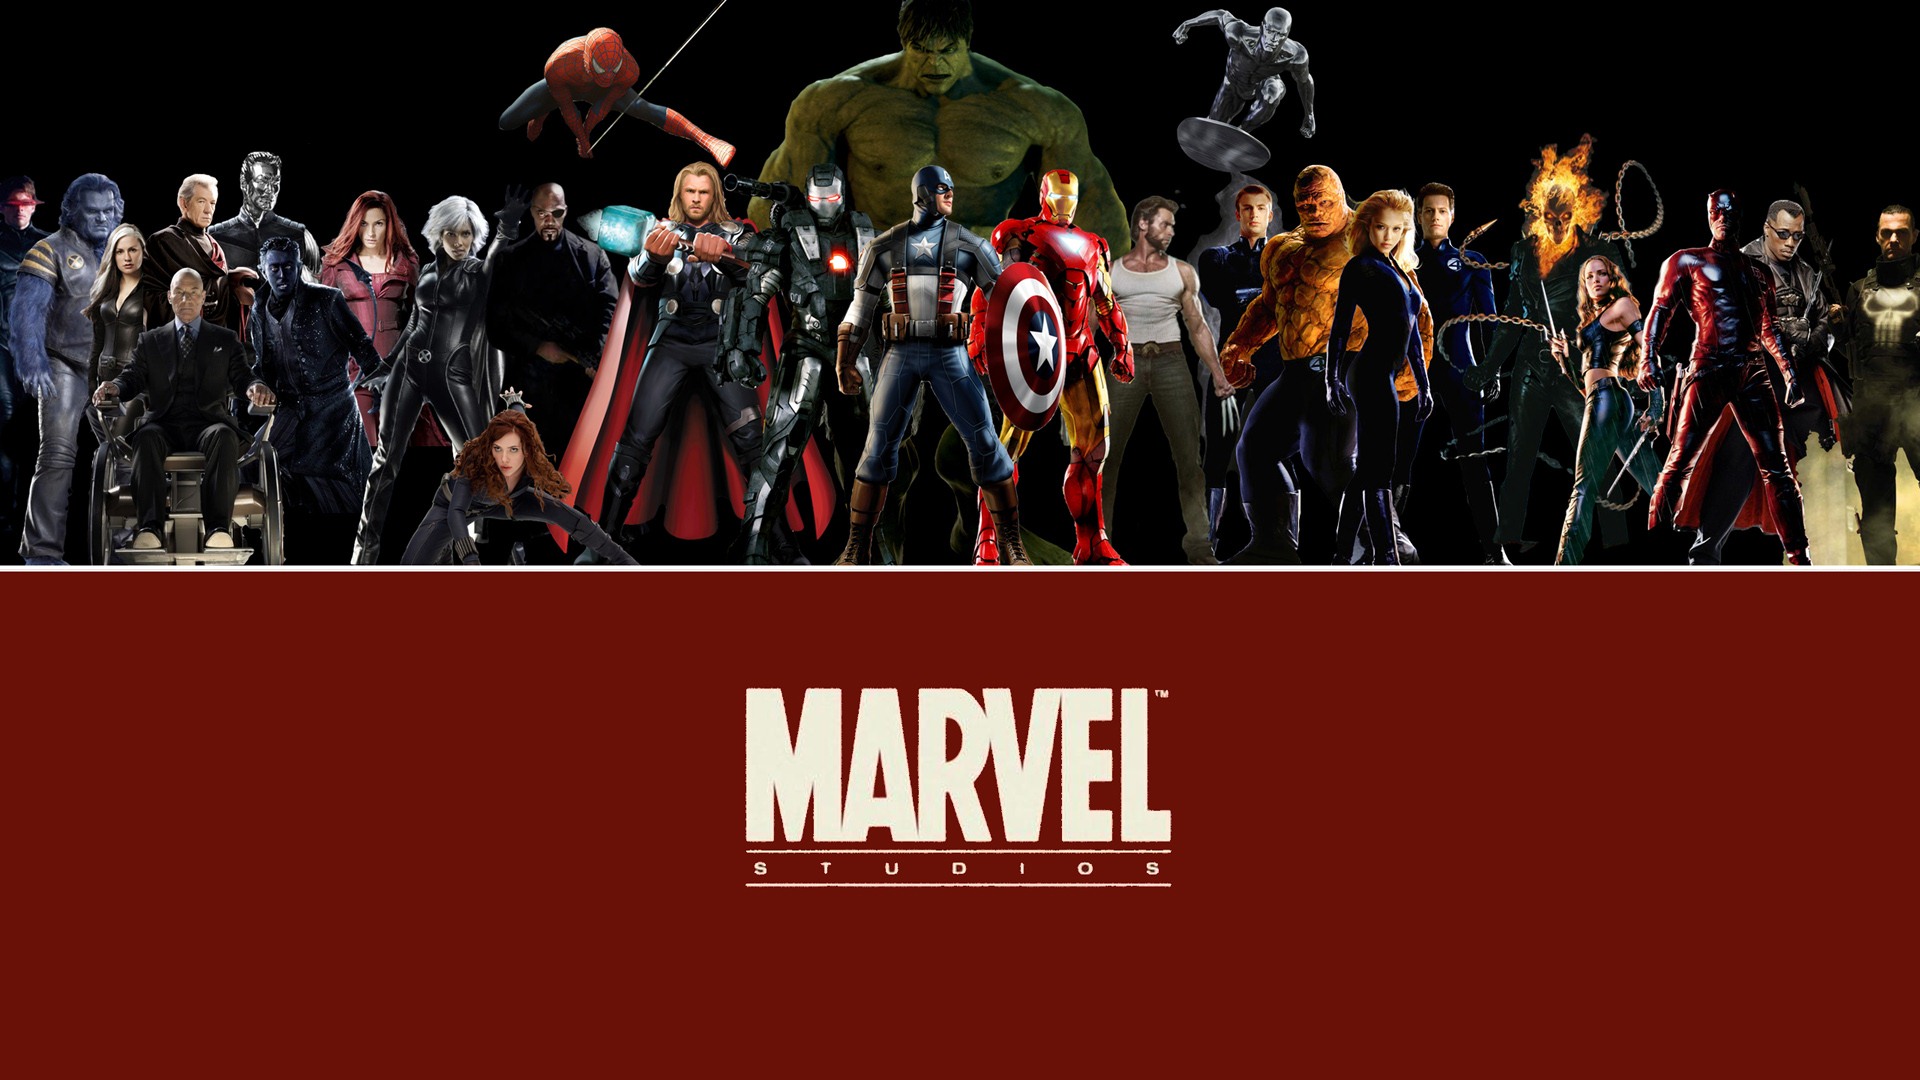 The Avengers 2012 HD wallpapers #8 - 1920x1080